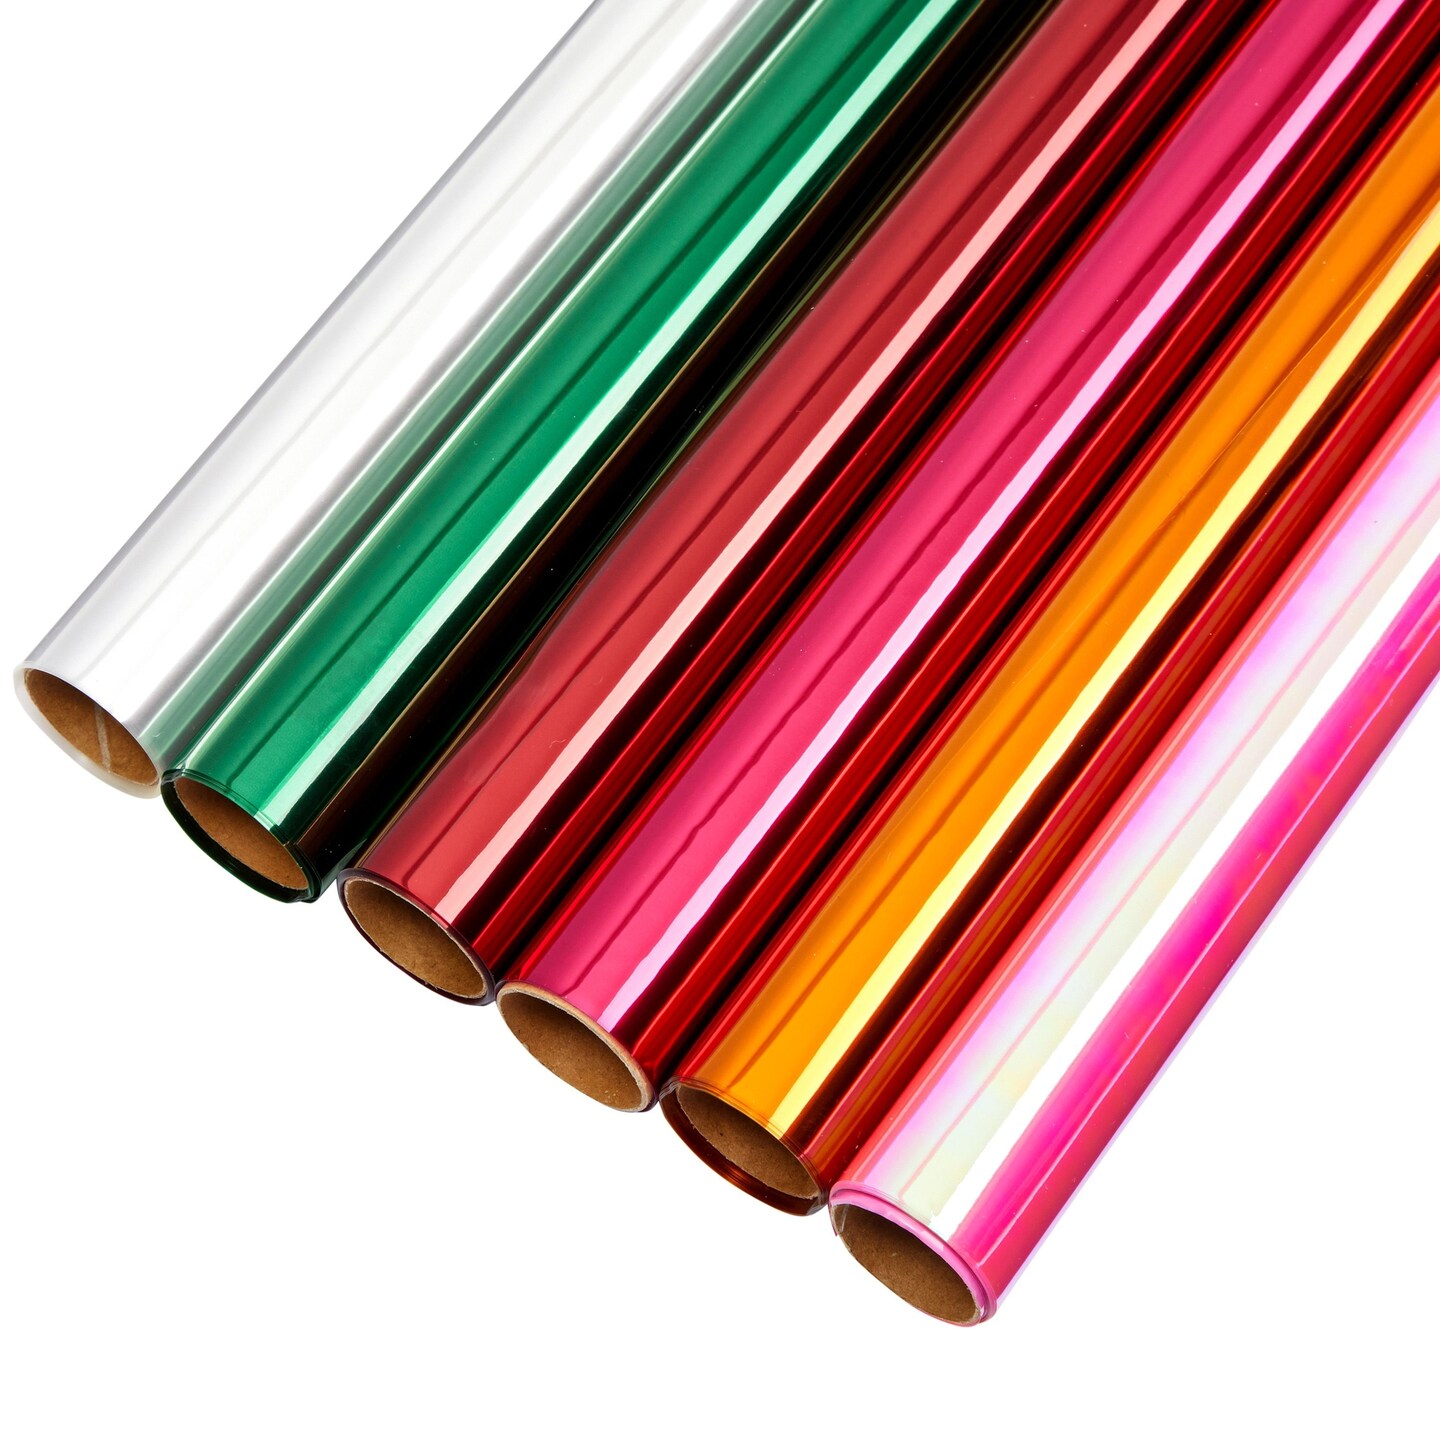 6 Roll Cellophane Wrap - 6 Color Transparent Colored Wrapping Paper for Gift Baskets, Treats, Crafts (17 Inch x 10 Feet)